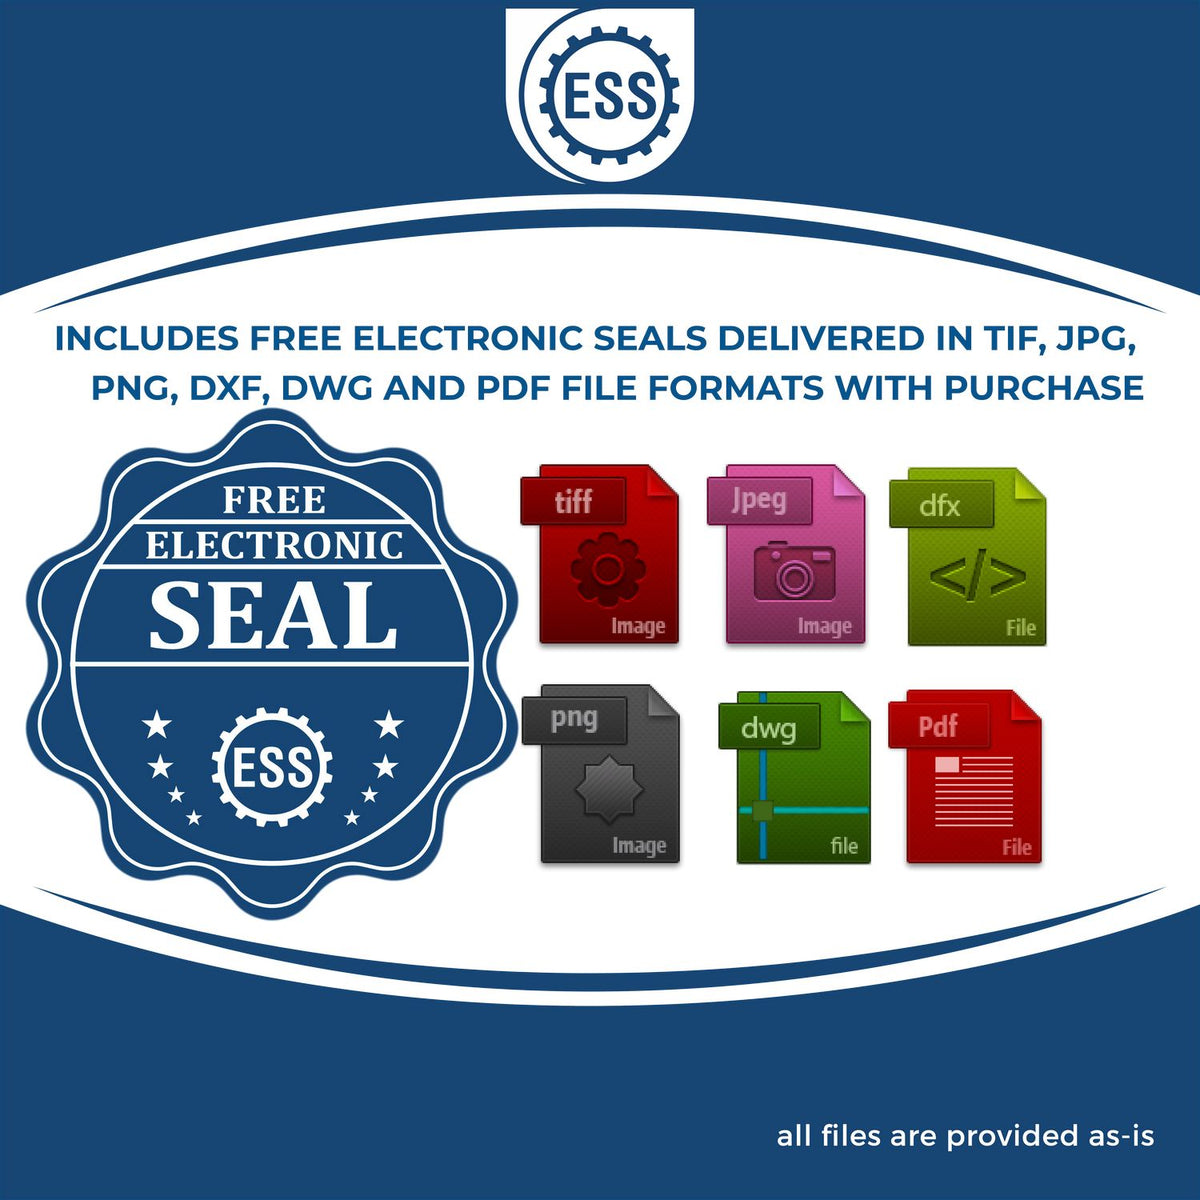 An infographic for the free electronic seal for the Heavy Duty Cast Iron North Dakota Architect Embosser illustrating the different file type icons such as DXF, DWG, TIF, JPG and PNG.